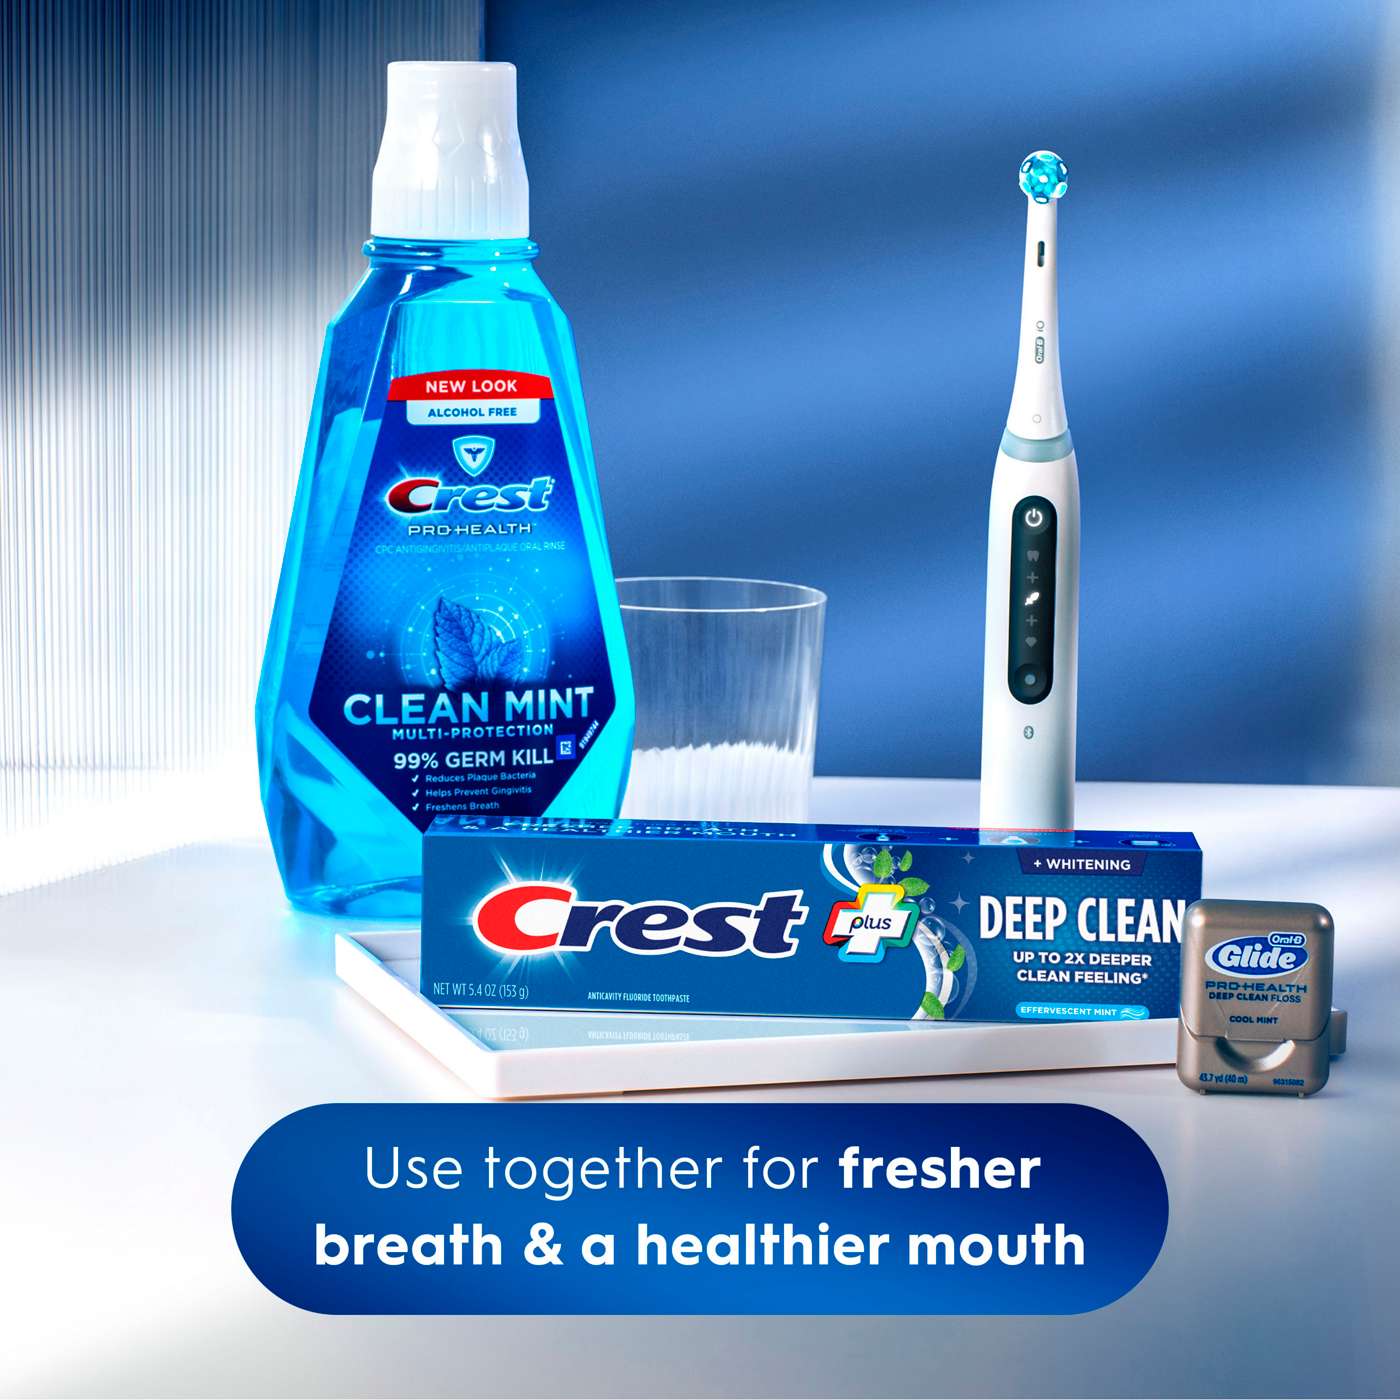 Crest Complete + Deep Clean Whitening Toothpaste - Effervescent Mint; image 5 of 10